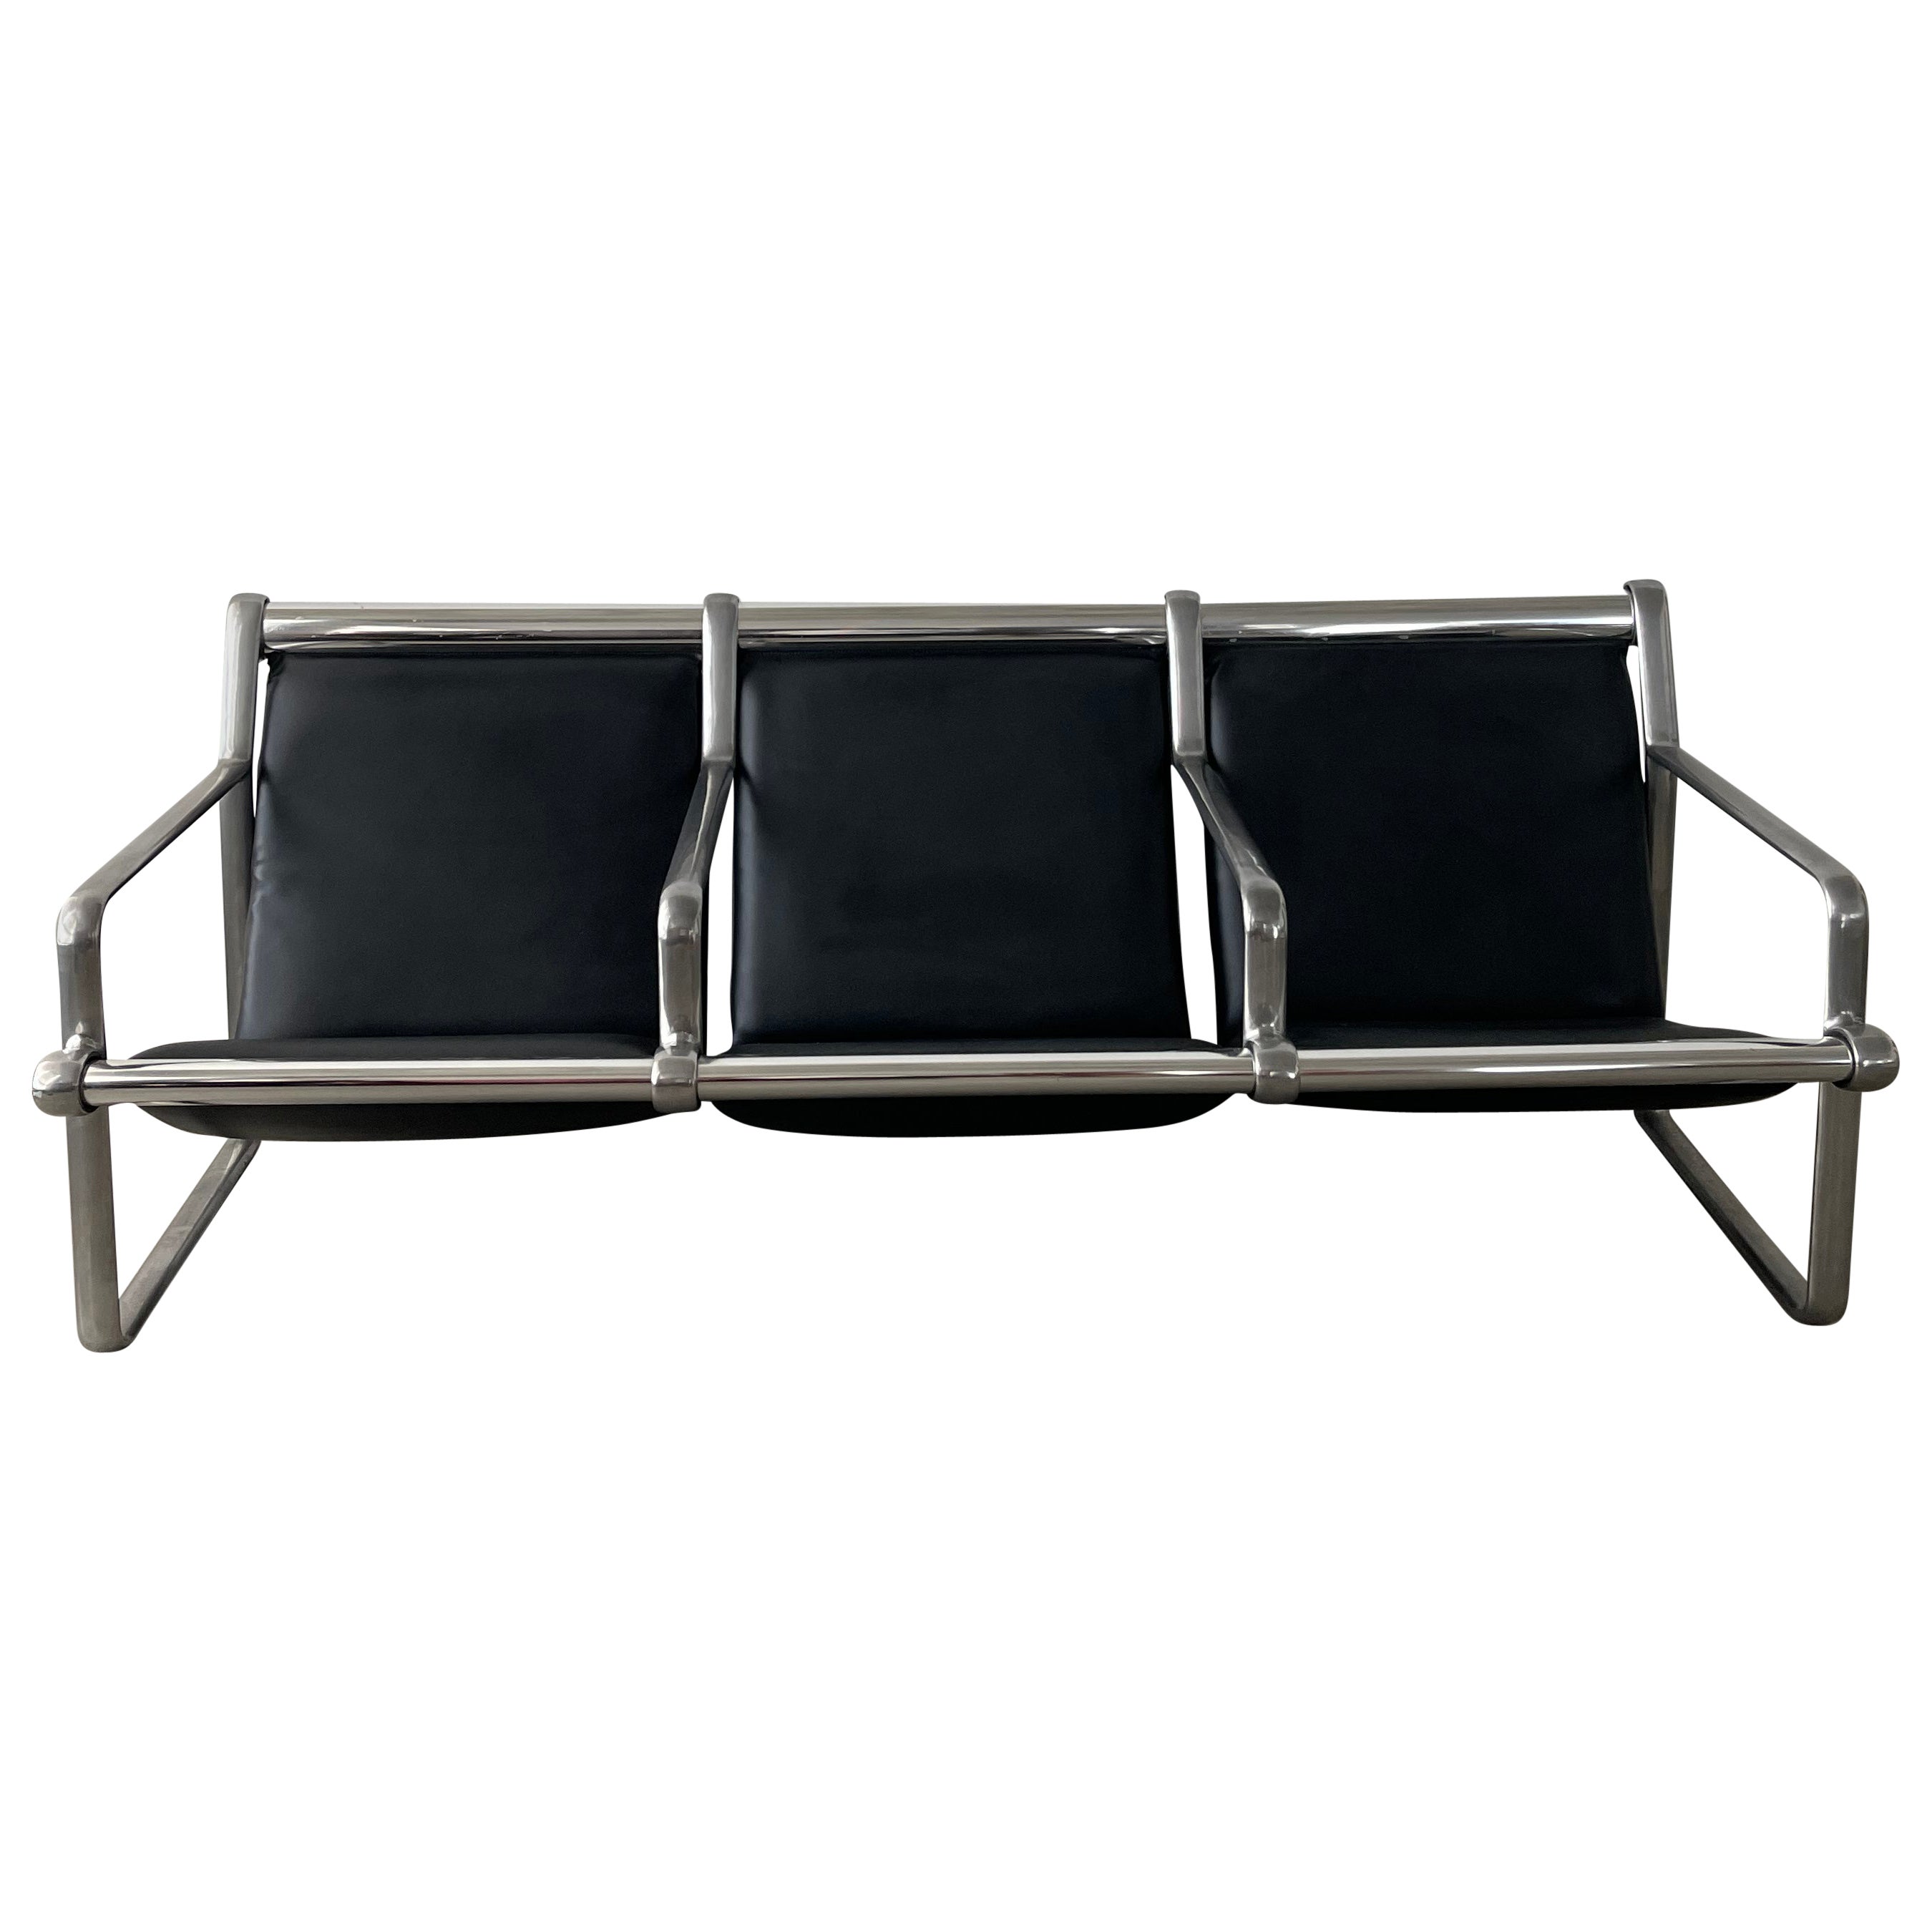 20th century Knoll 3-seat sling sofa by Bruce Hannah & Andrew Morrison was a Mid-century icon. The frame is cast aluminum and the seats are done with a black durable vinyl that replicates leather extremely well. Amazing design that brings character